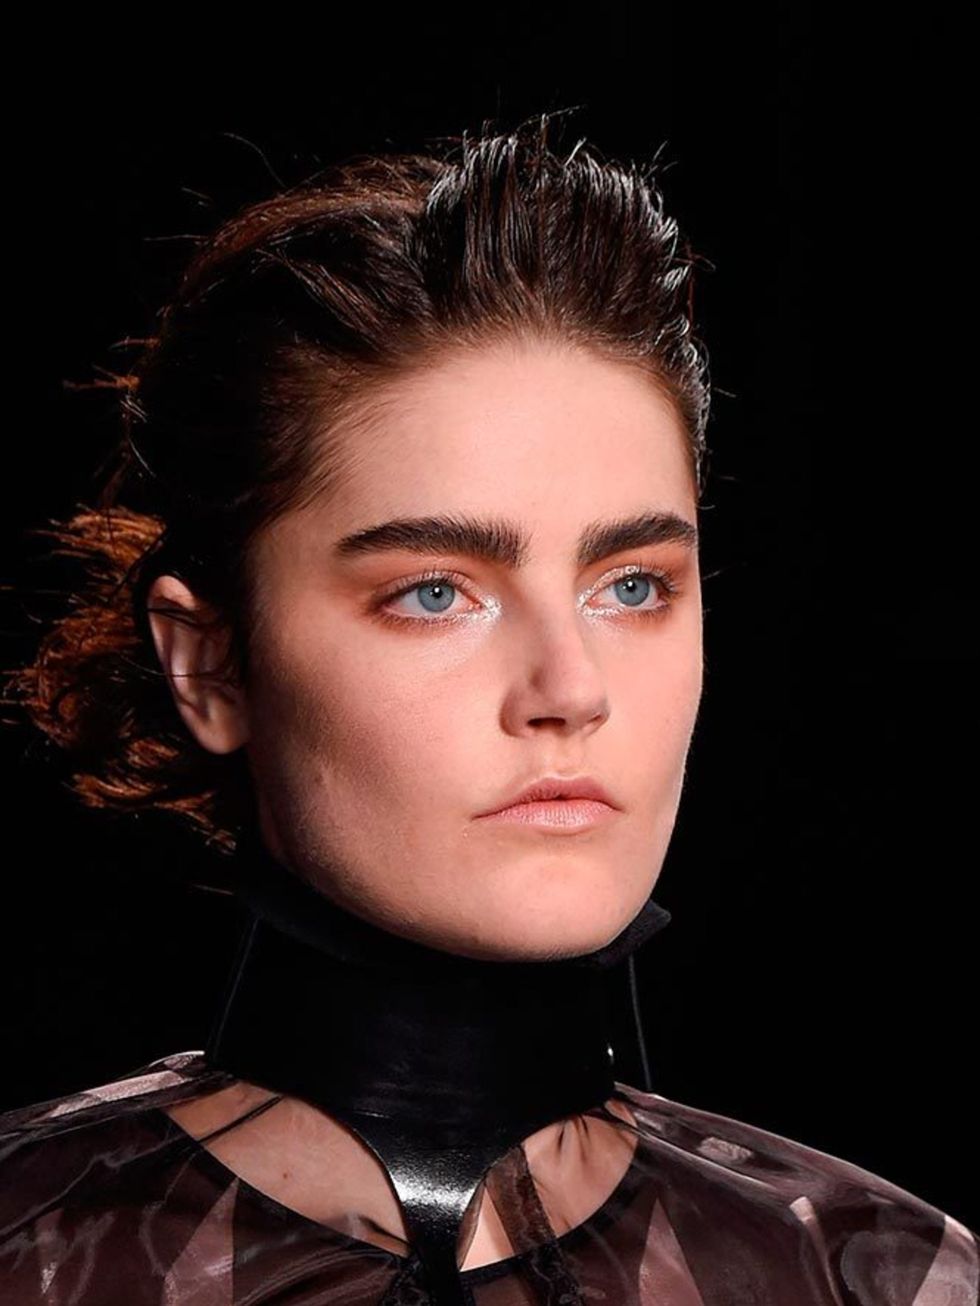 <p><strong><a href="http://www.elleuk.com/catwalk/season/spring-summer-2016/letter/l-a#designer-a">Ann Demeulemeester</a></strong></p>

<p>The look: One Way To Brow Town</p>

<p>Make-up artist: Lyndsey Alexander</p>

<p>Key products: MAC Fly By Twilight F